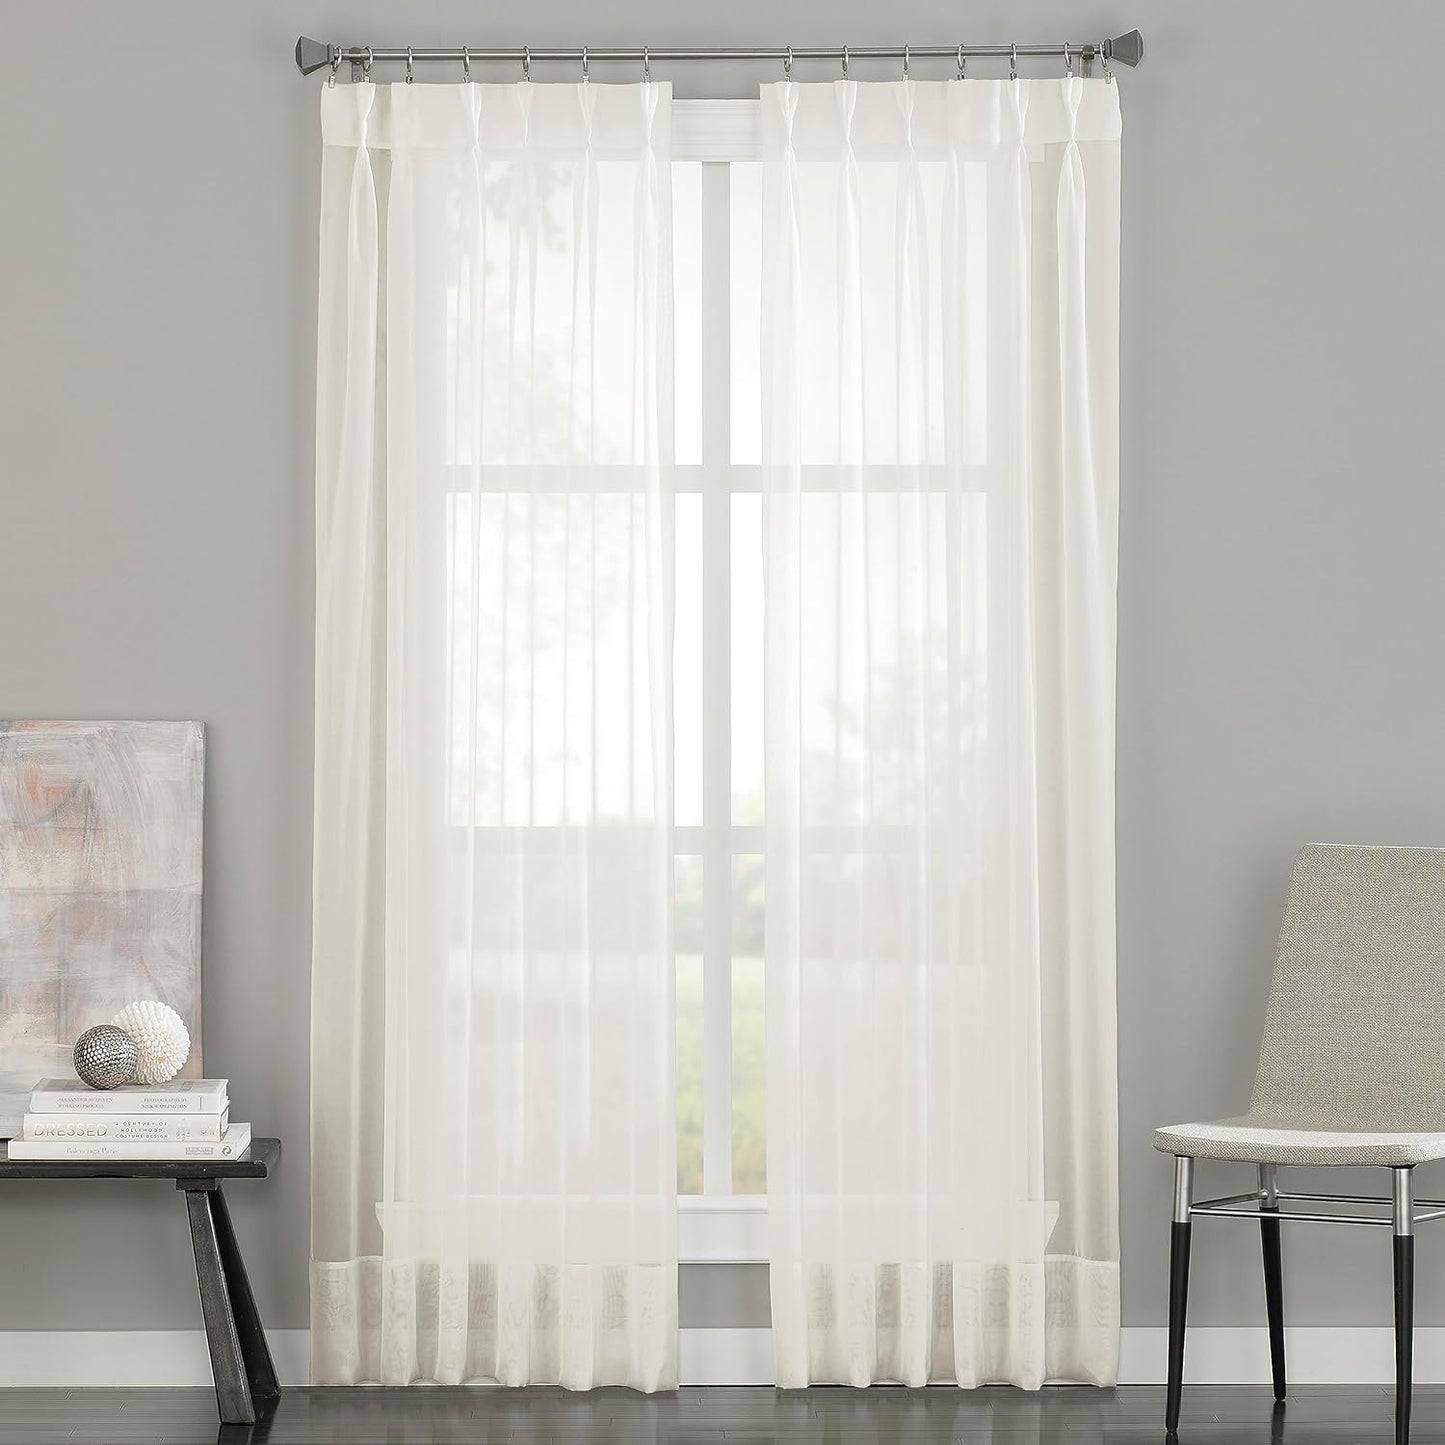 Curtainworks Soho Voile Sheer Pinch Pleat Curtain Panel, 29 by 63", Oyster  CHF Industries Oyster 29 X 108 In 